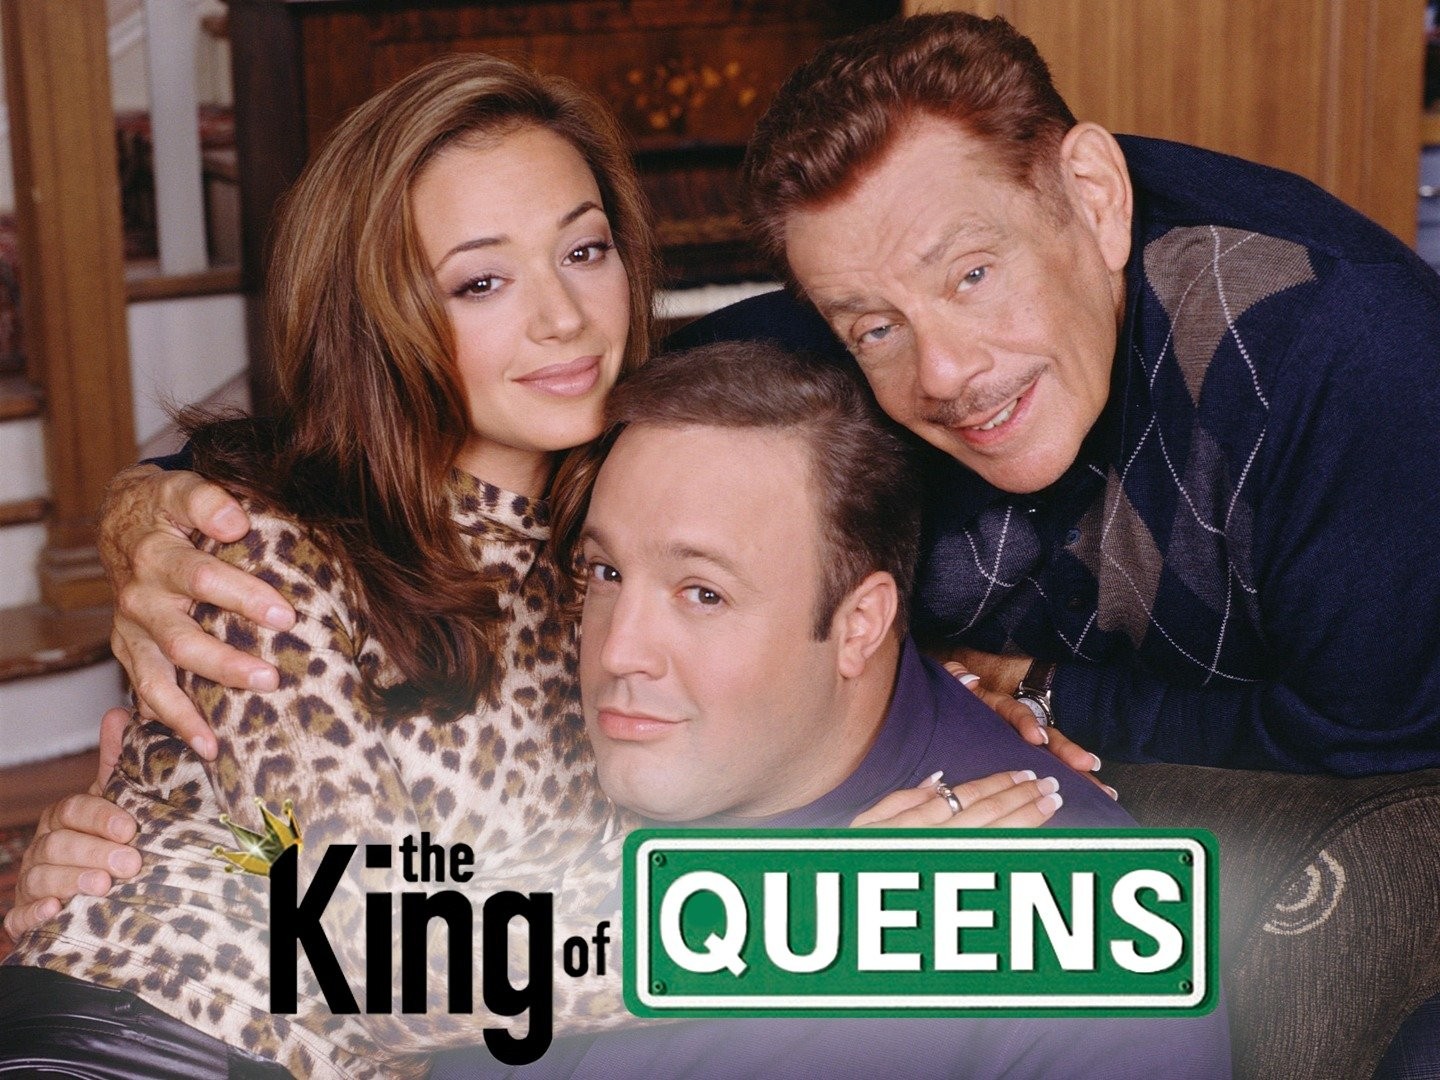 The King of Queens Season 2